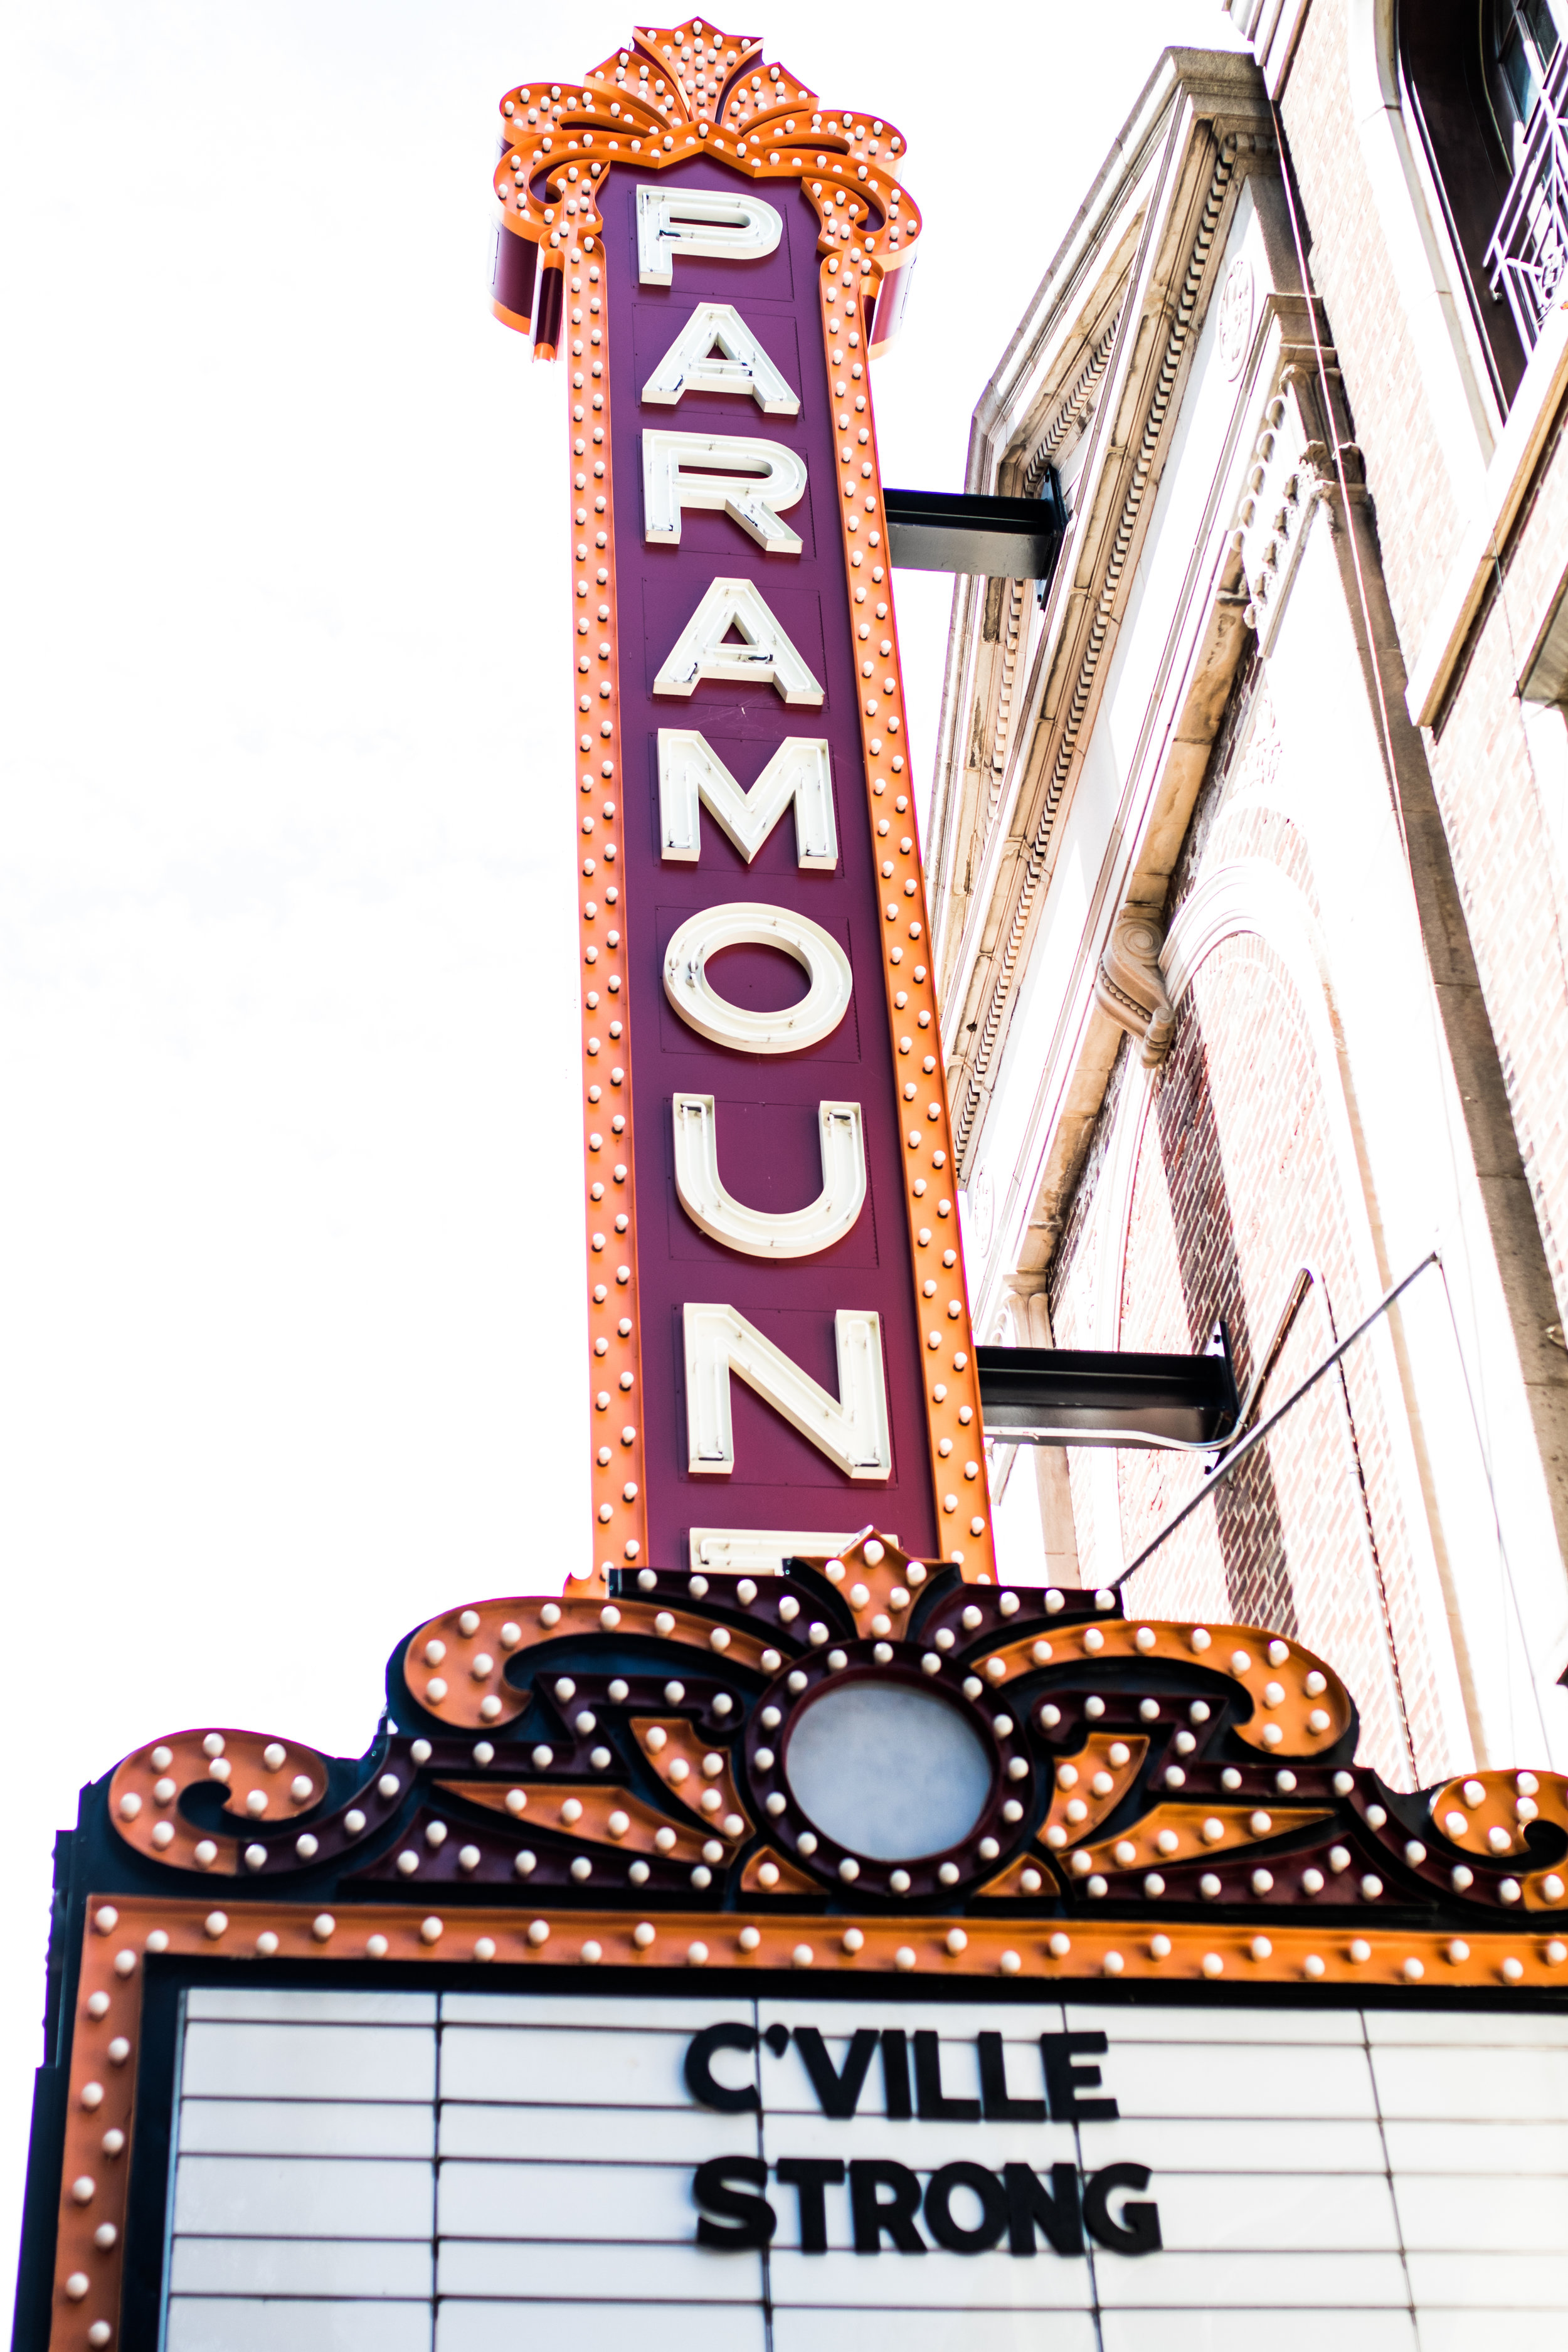  Heather Heyer's memorial service was at Paramount Theatre - just one block from where she died.&nbsp; 